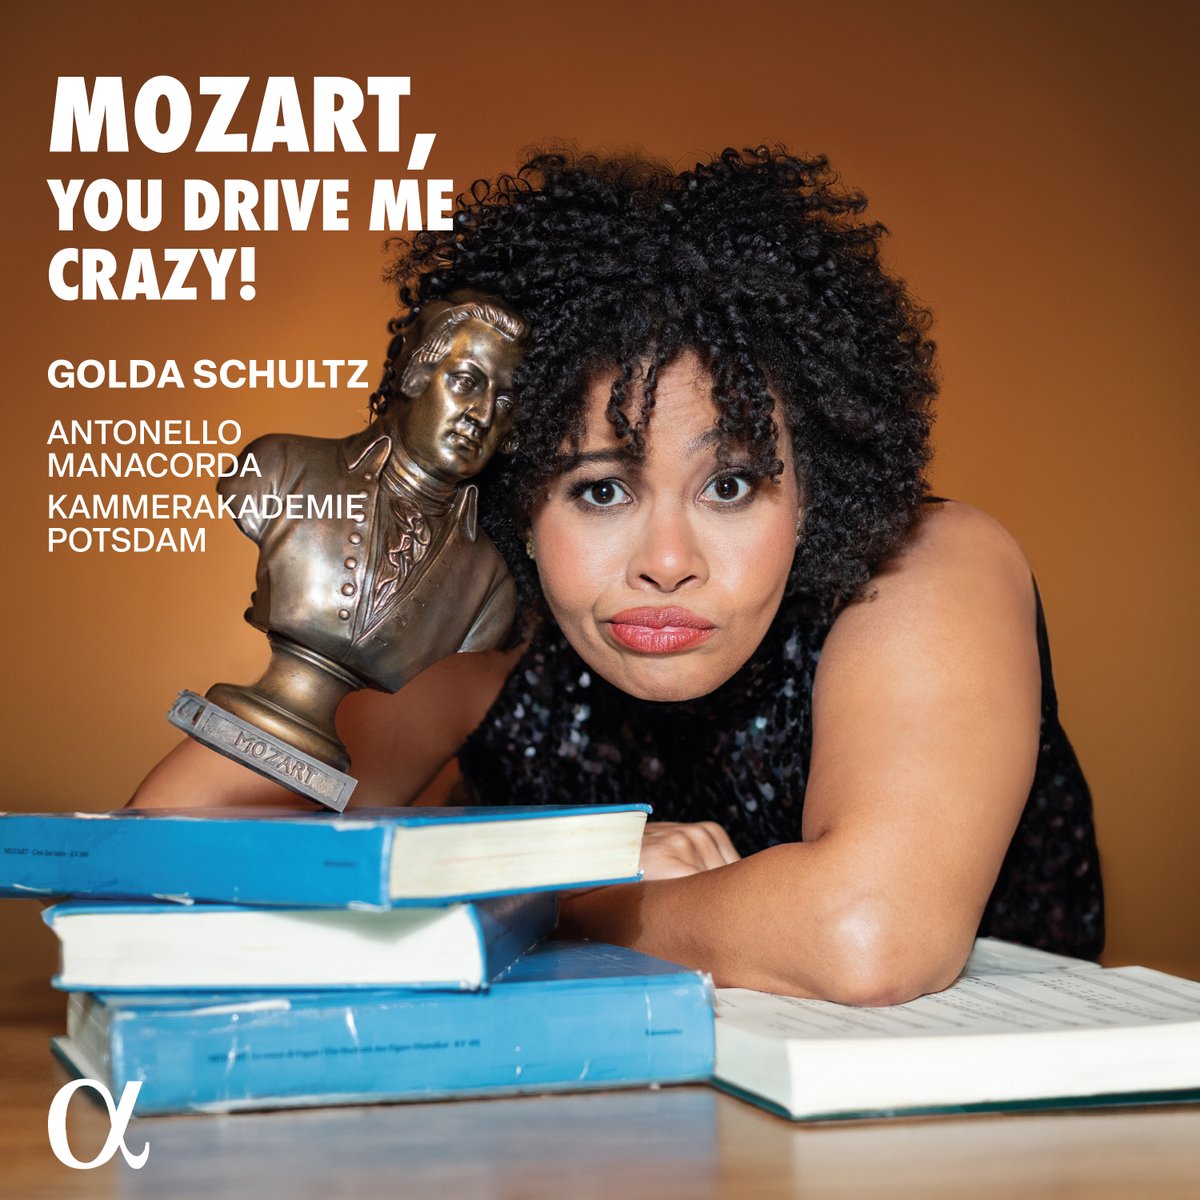 Soprano @SchultzGolda releases her new album 'Mozart, You Drive Me Crazy!' on @alpha_classics, devoted to the heroines of #DonGiovanni, #Cosifantutte and #LenozzediFigaro. #hpvoice #newalbum #operasinger More info: ow.ly/lRtt50ReVNB